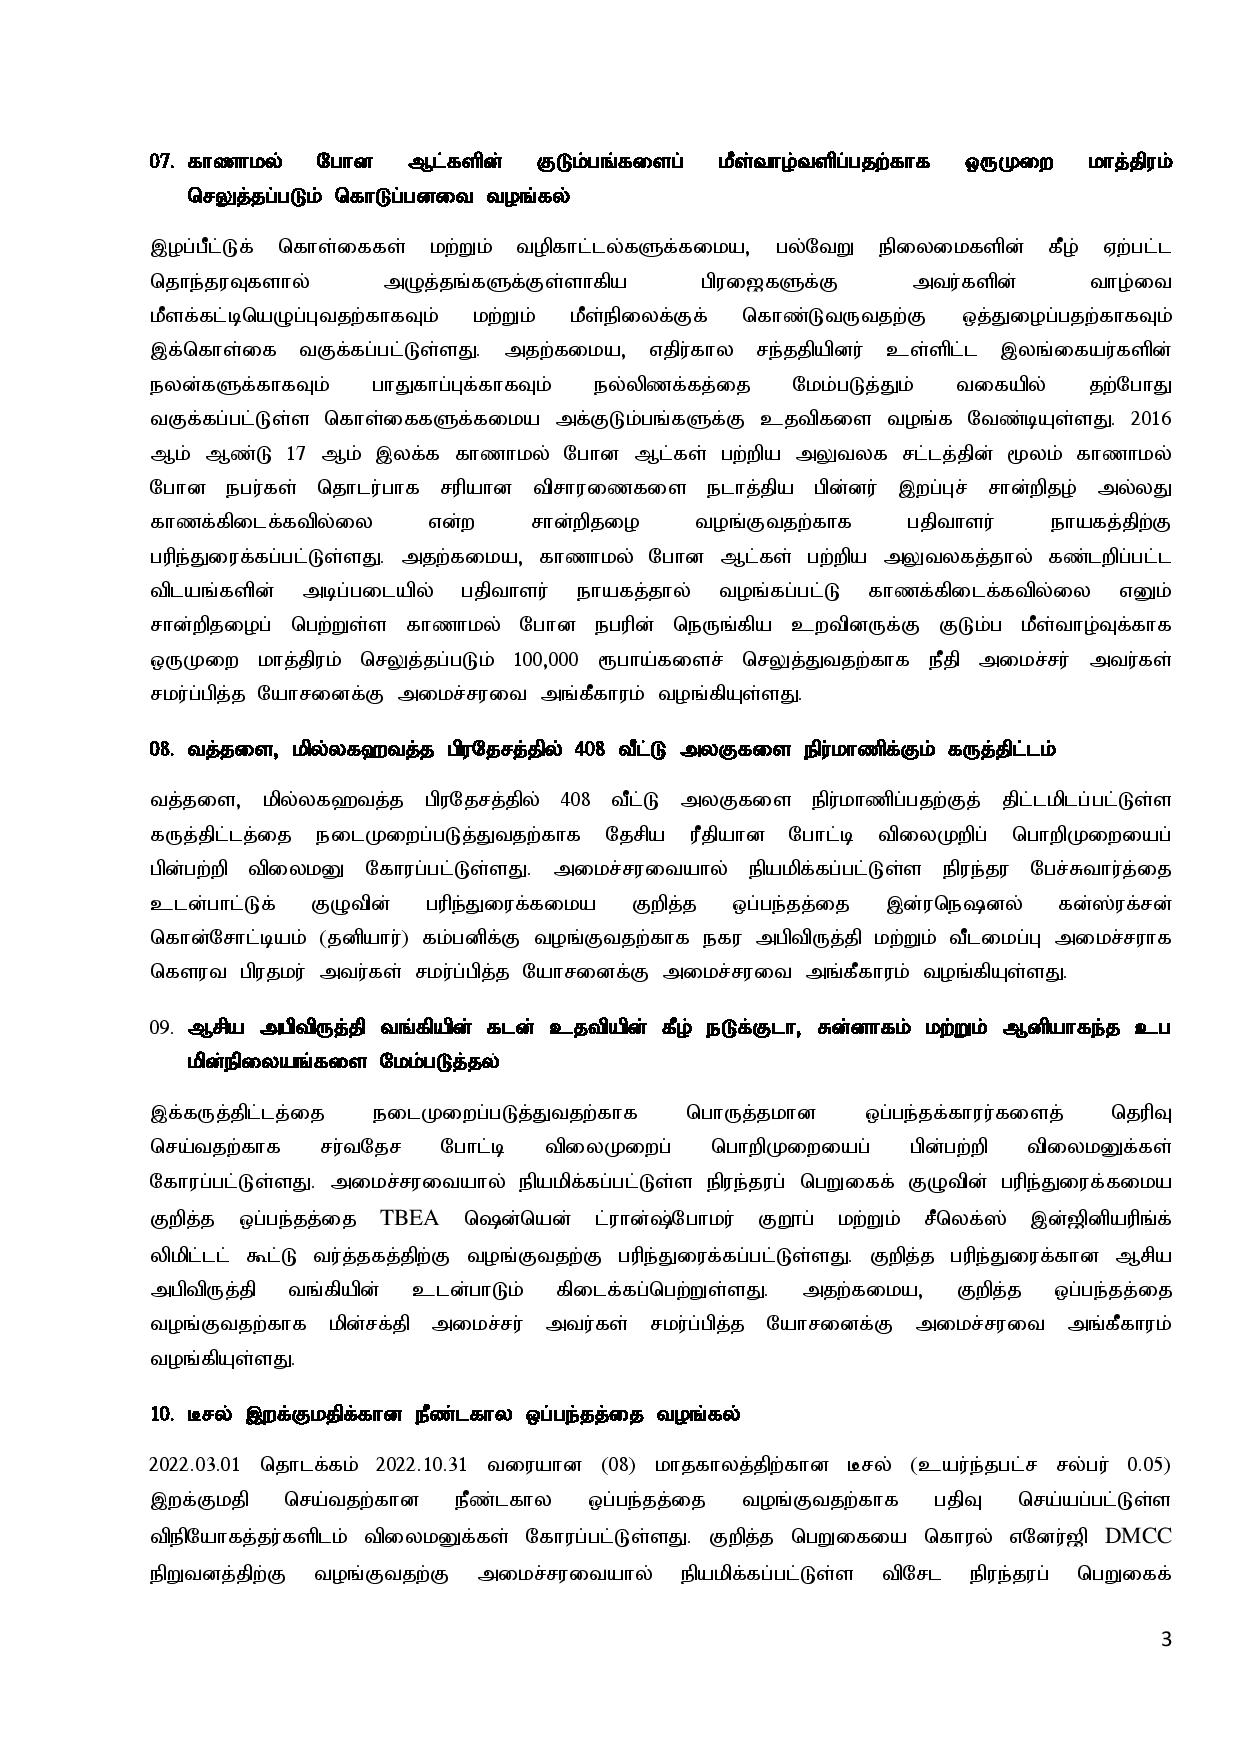 Cabinet Decisions on 14.03.2022 Tamil page 003